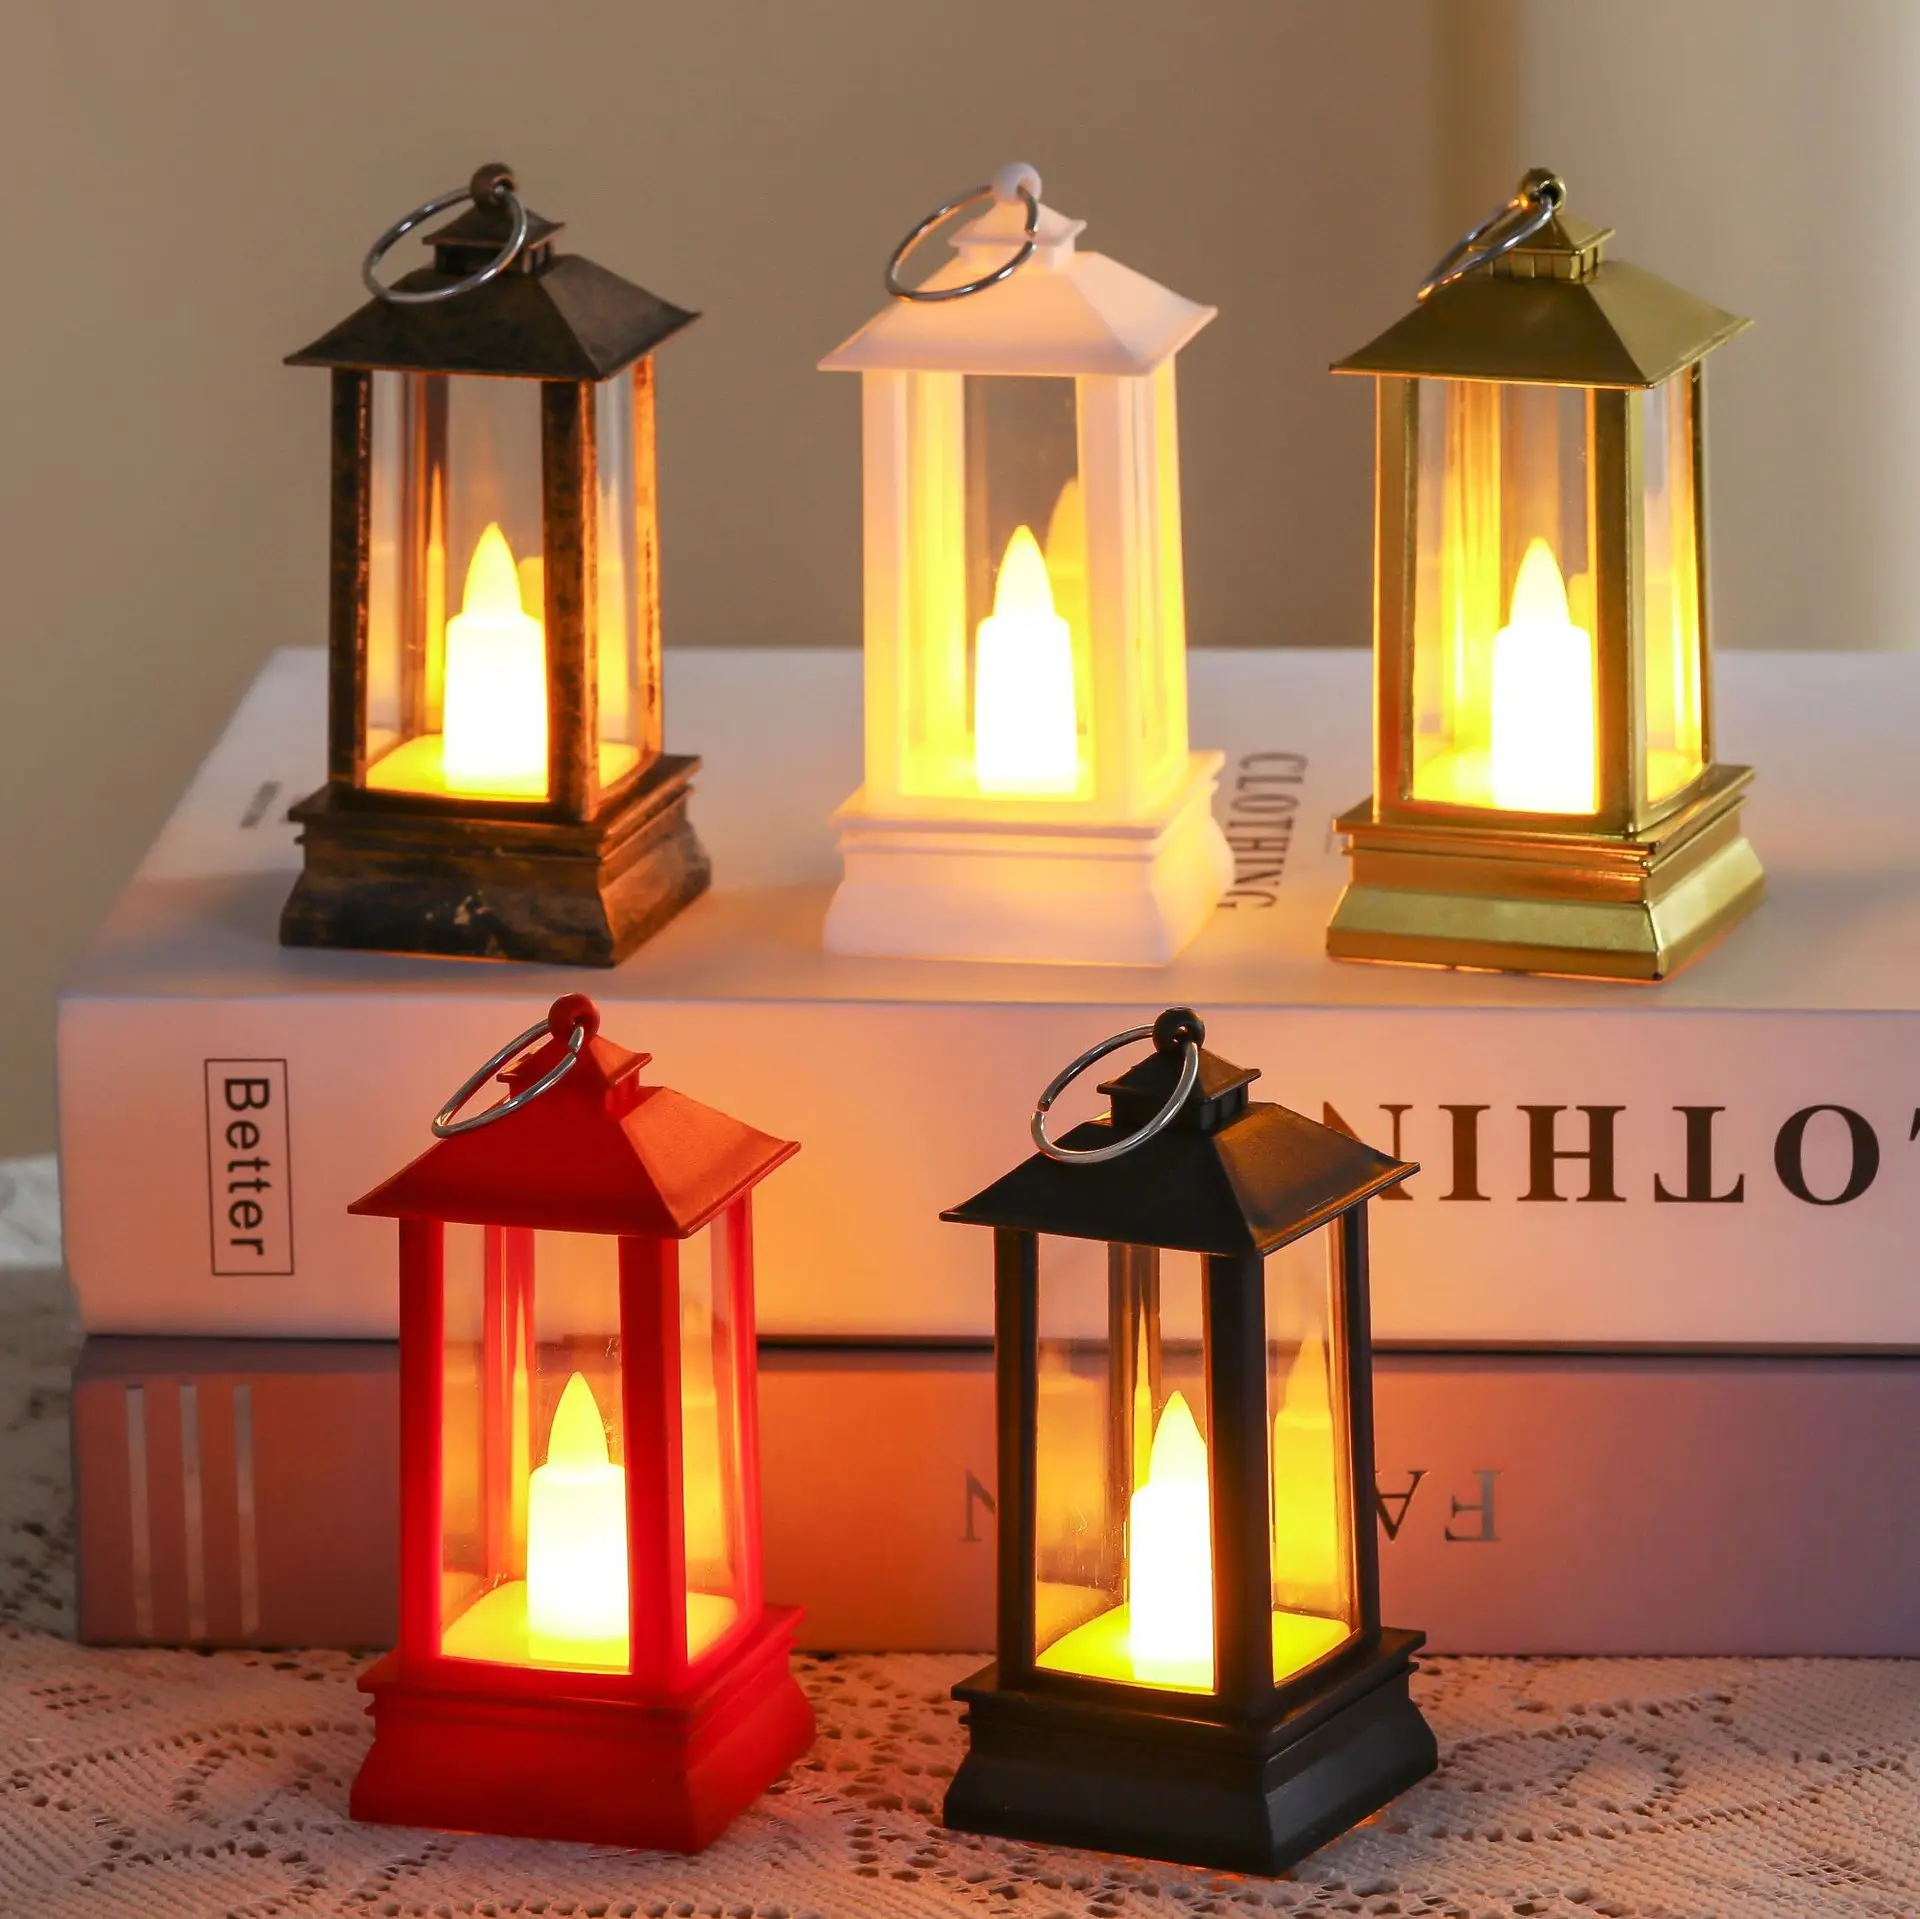 

5pcs Christmas decoration led candle small wind lamp ornaments gift props bar scene layout portable flame lamp crafts decoration